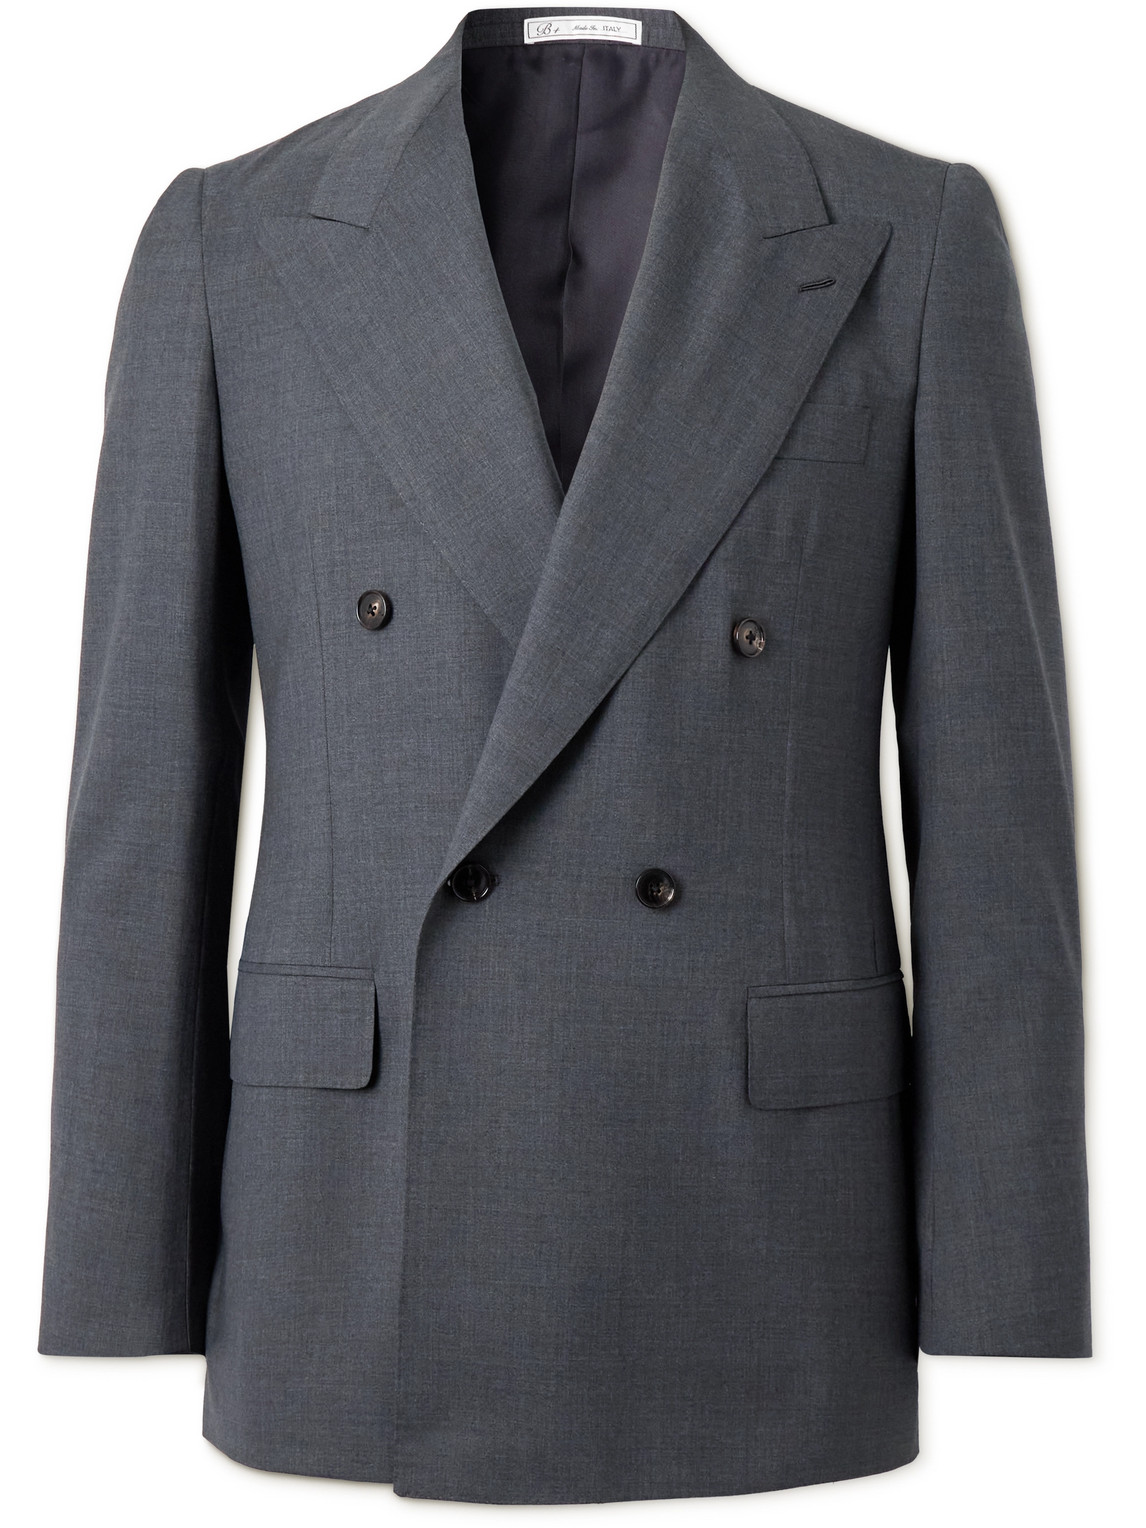 Umit Benan B+ Double-breasted Wool Suit Jacket In Grey